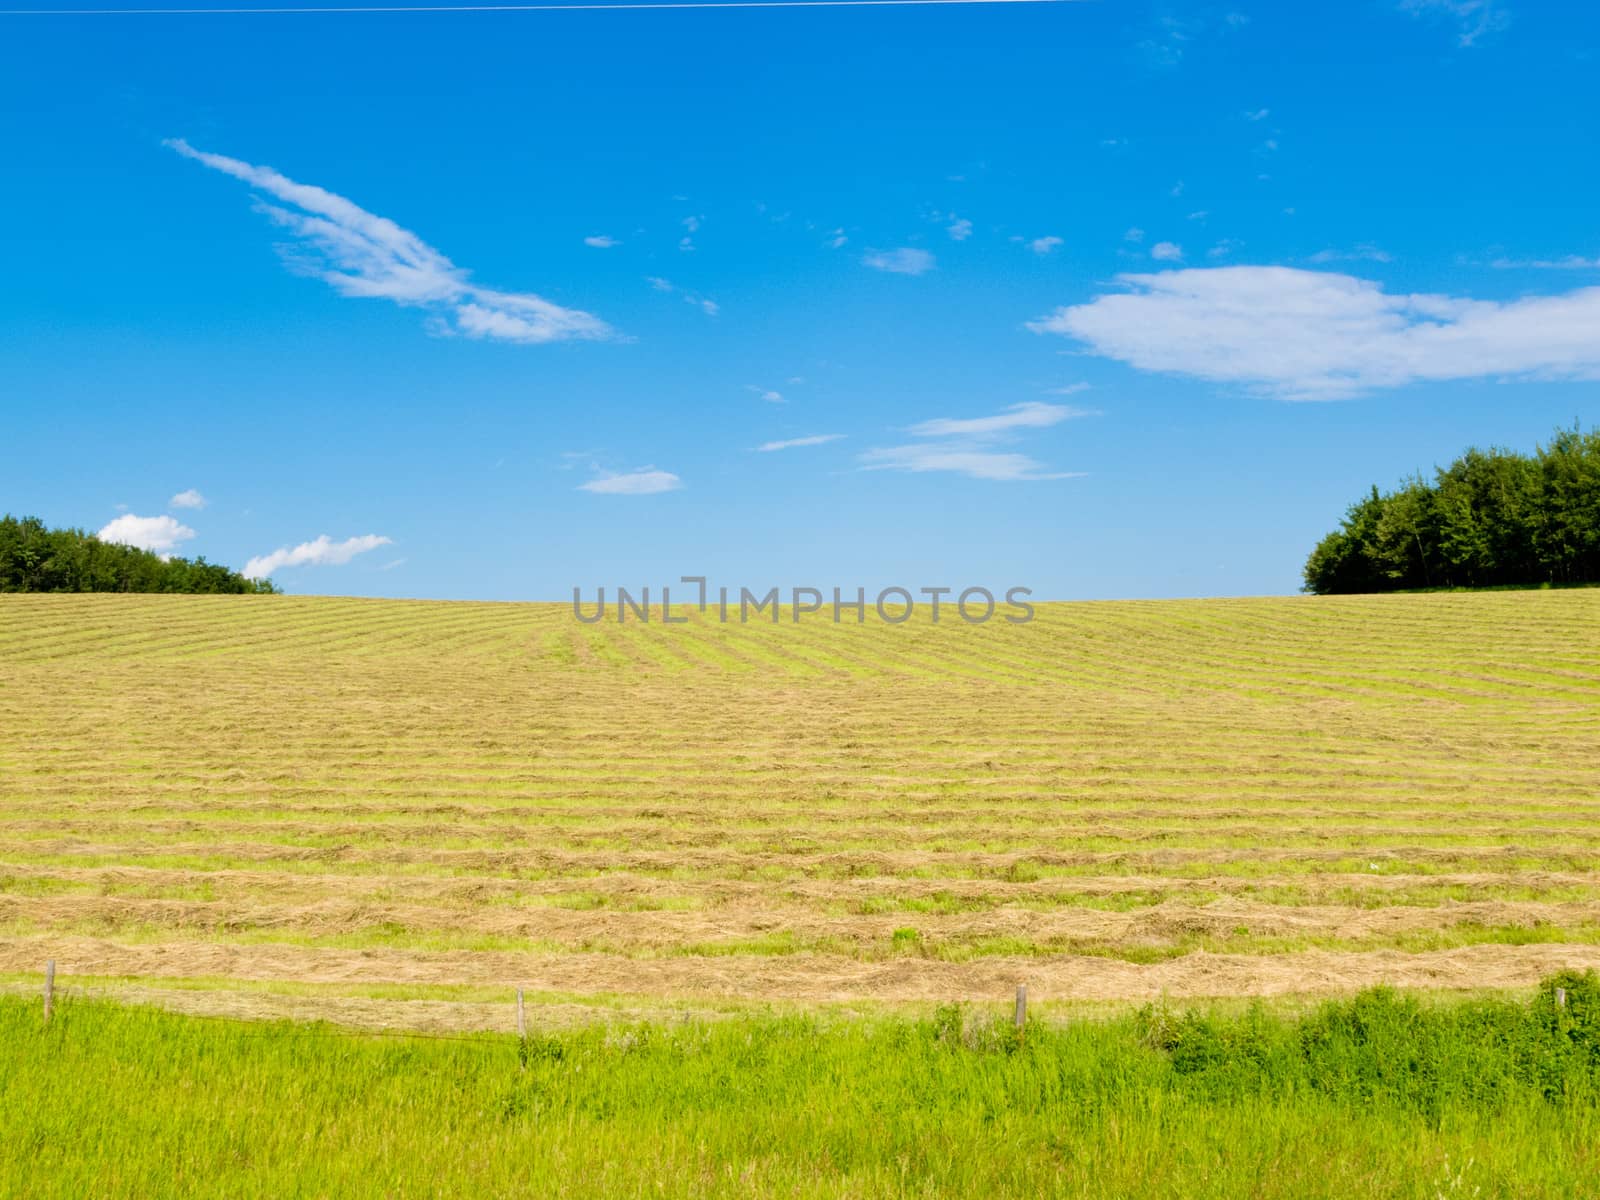 Freshly cut hay in rows on agricultural meadow with blue sky and some clouds agriculture farmland landscape Alberta Canada